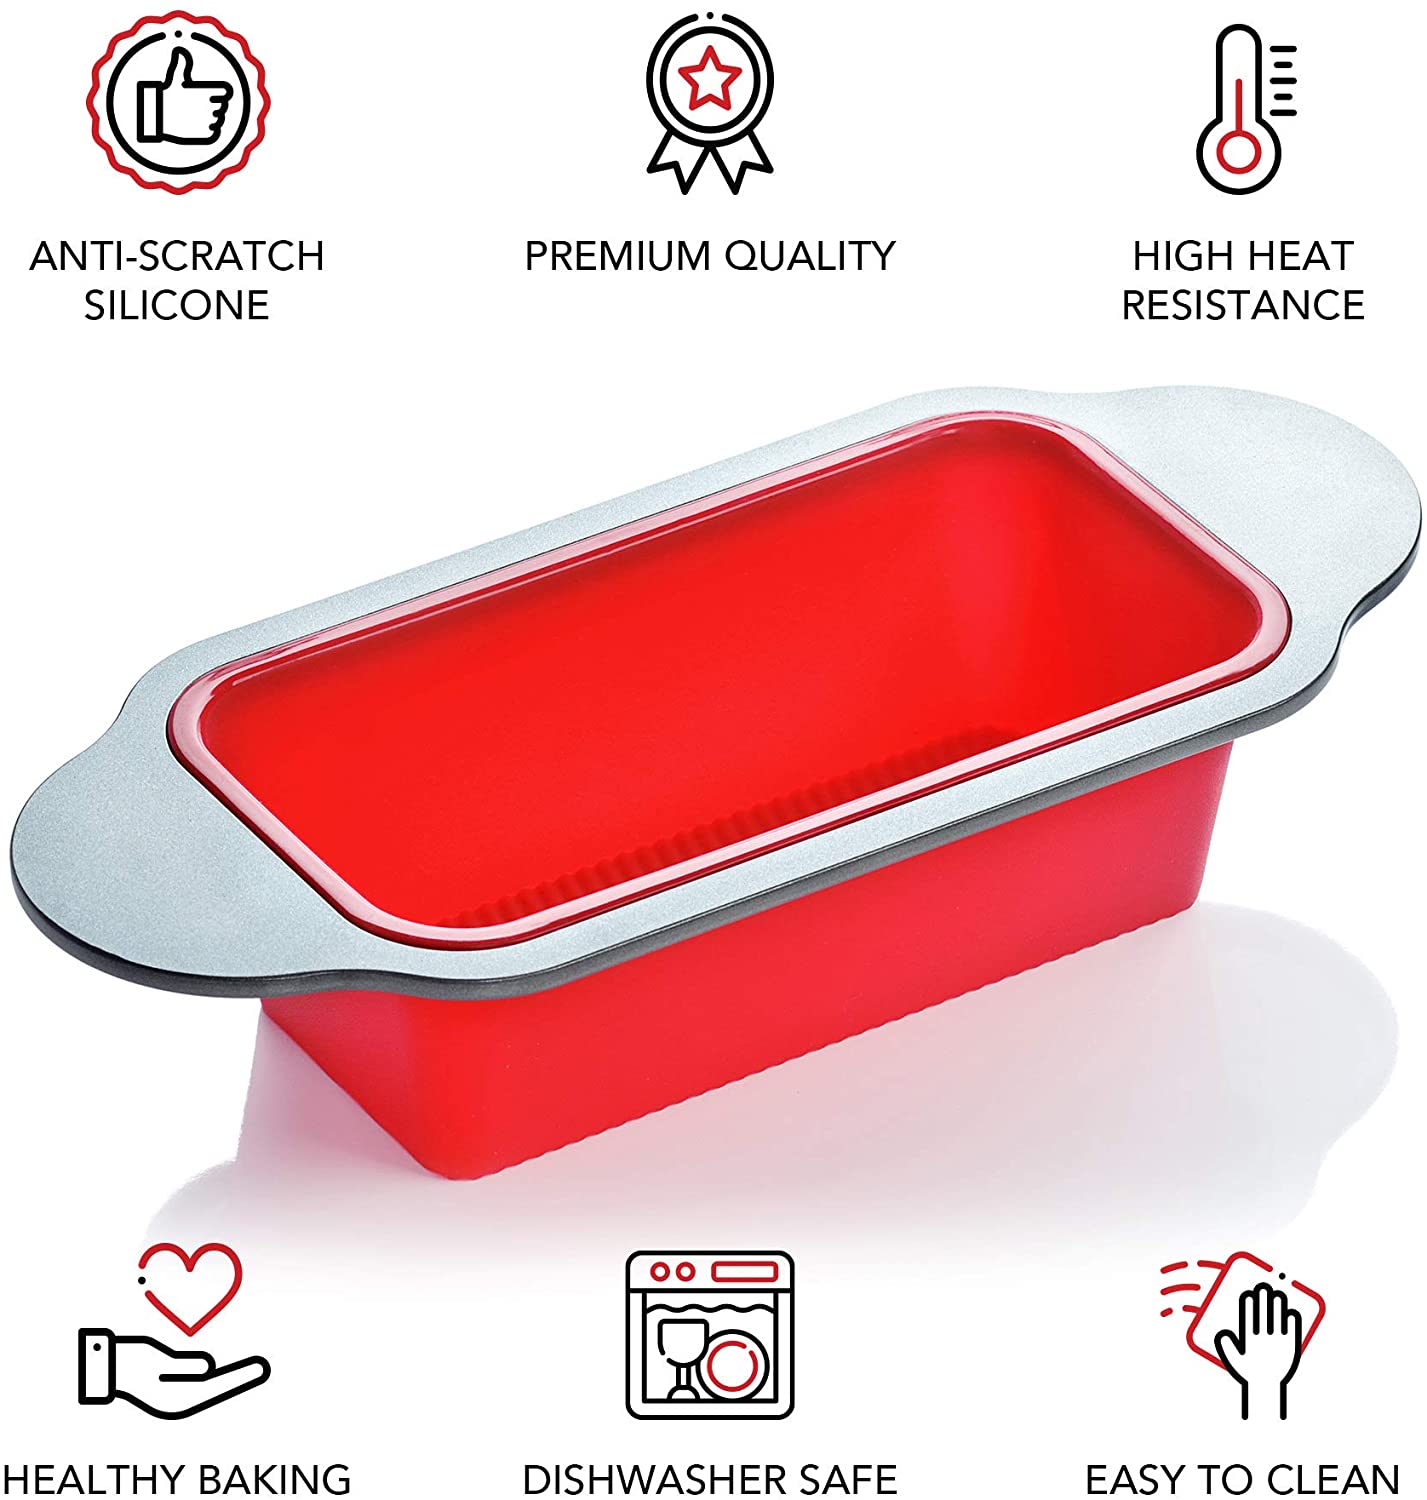 Walfos Silicone Loaf Pan - Non-Stick Silicone Bread Pan, Just PoP Out!  Perfect for Bread, Cake, Brownies, Meatloaf, BPA Free & Dishwasher Safe